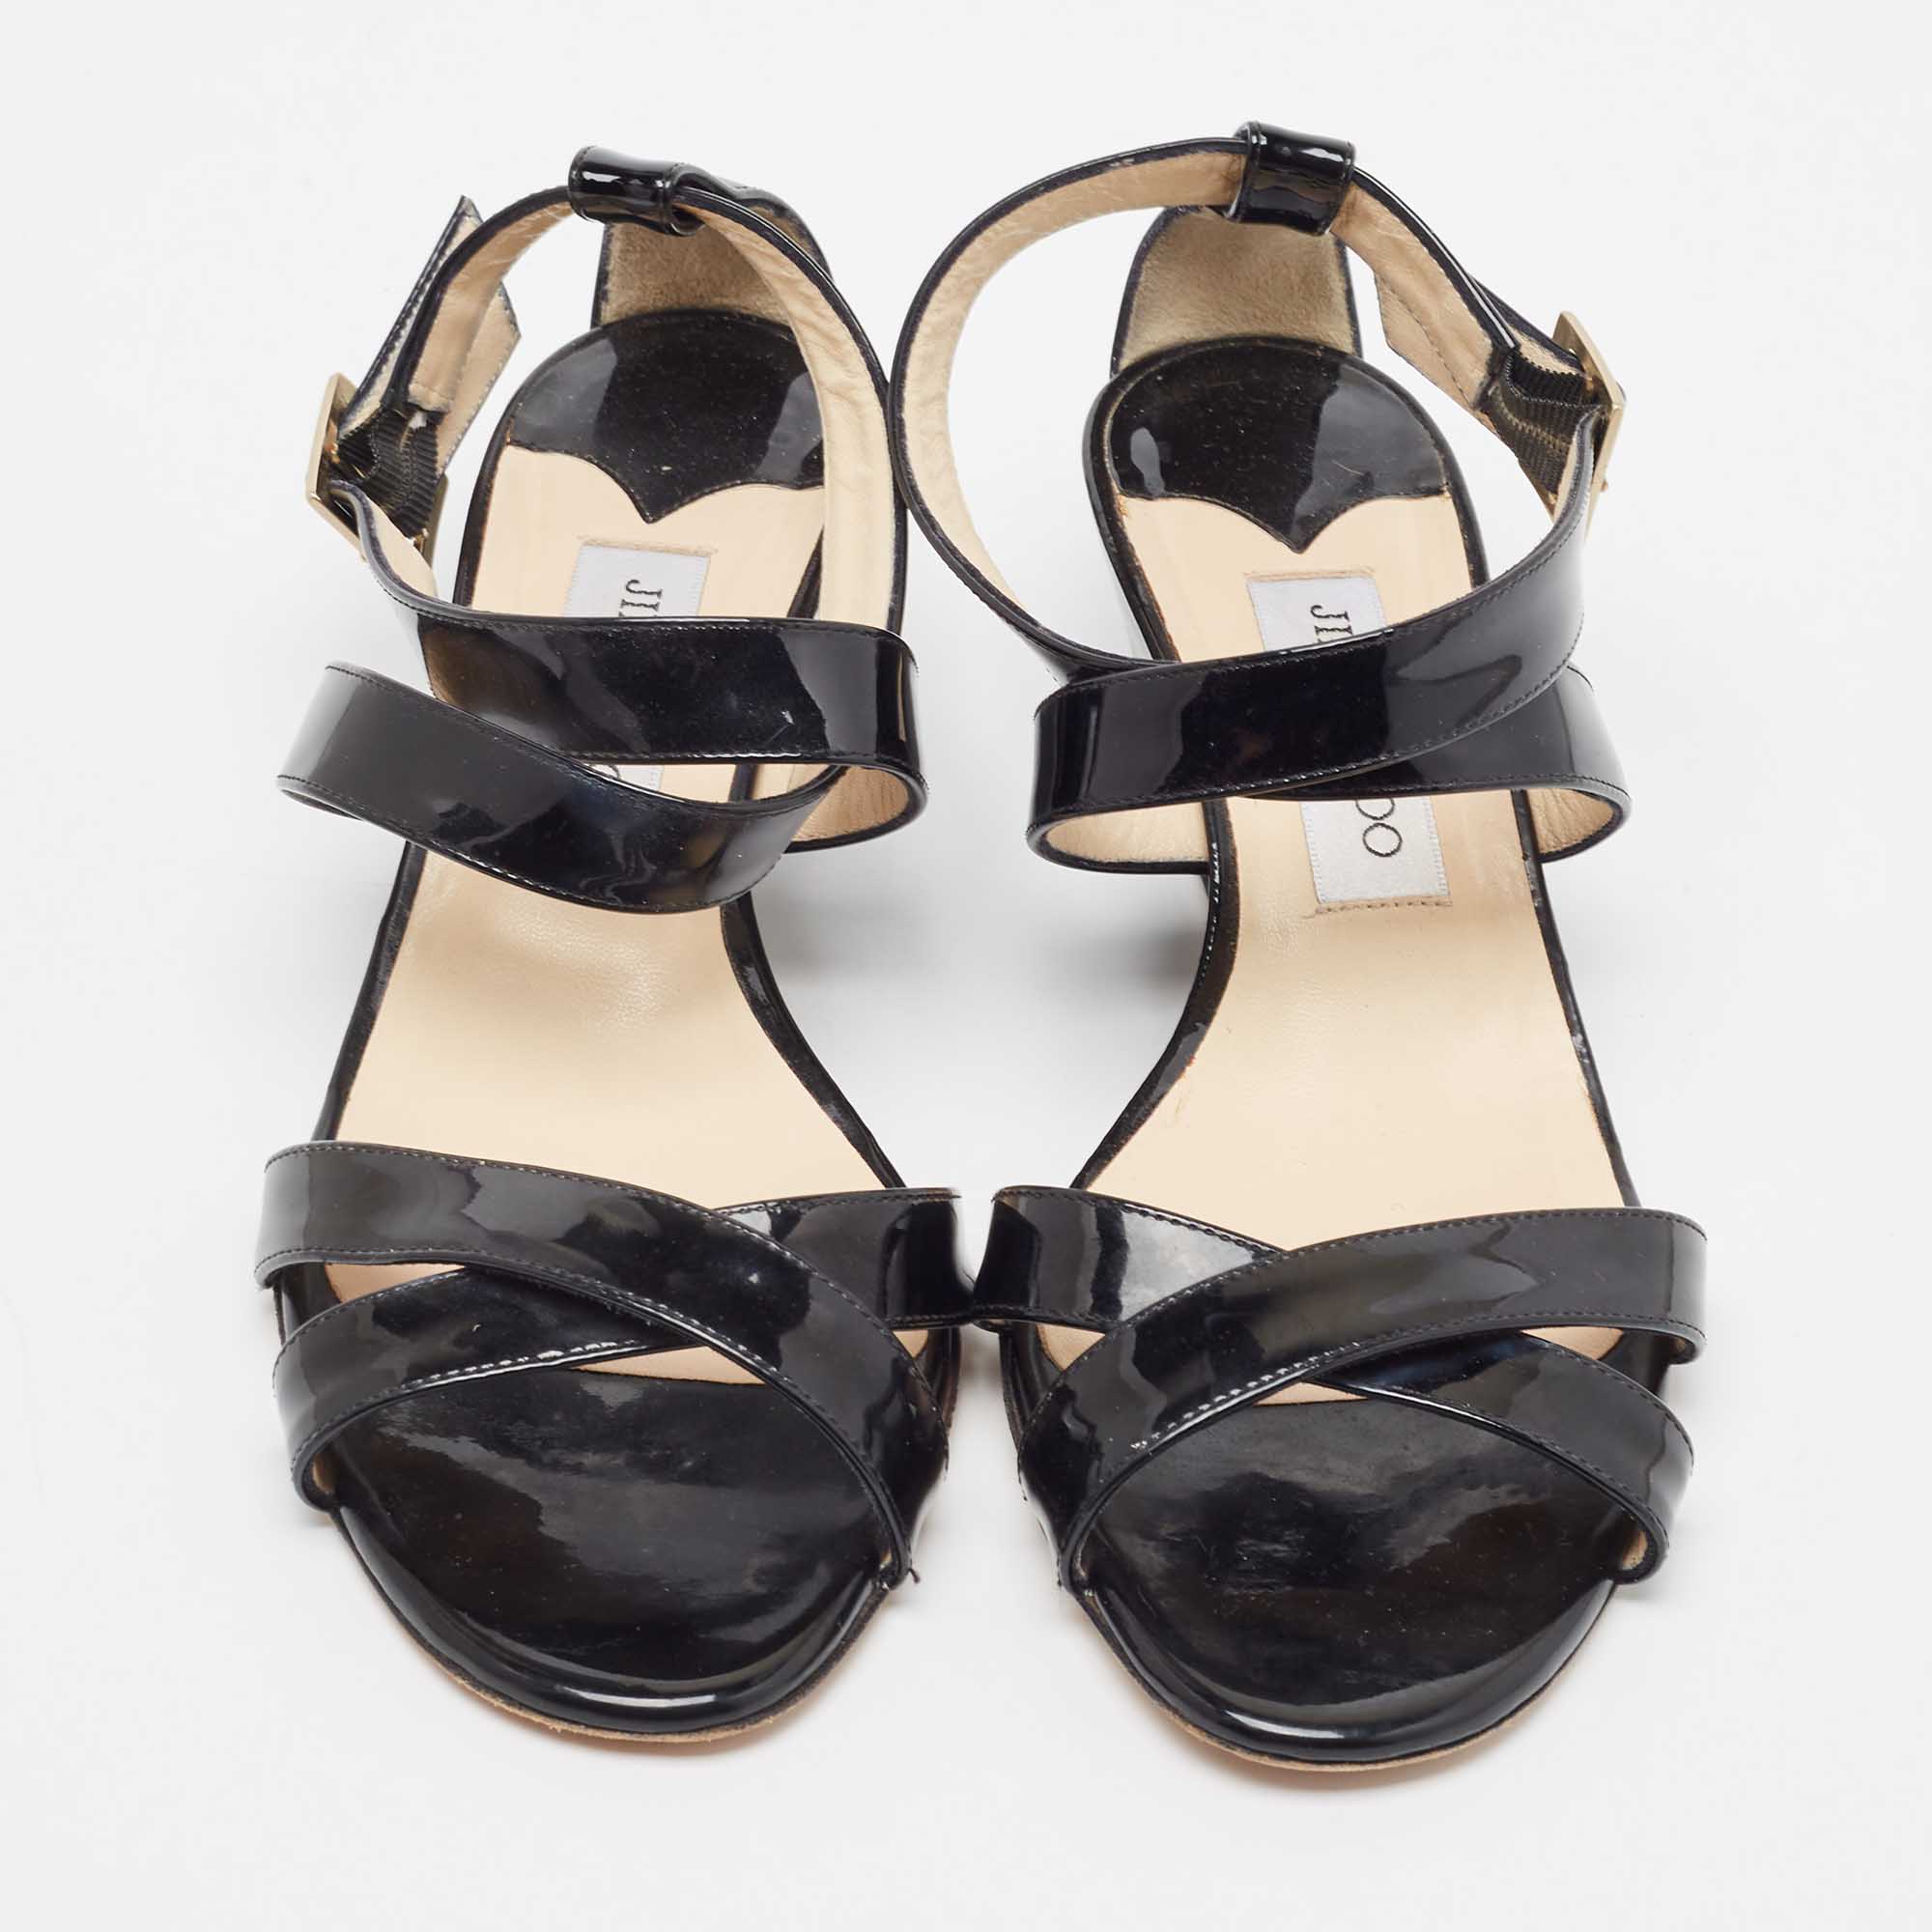 Jimmy Choo Black Patent Leather Chiara Crisscross Ankle Strap Wedge Sandals Size 39.5